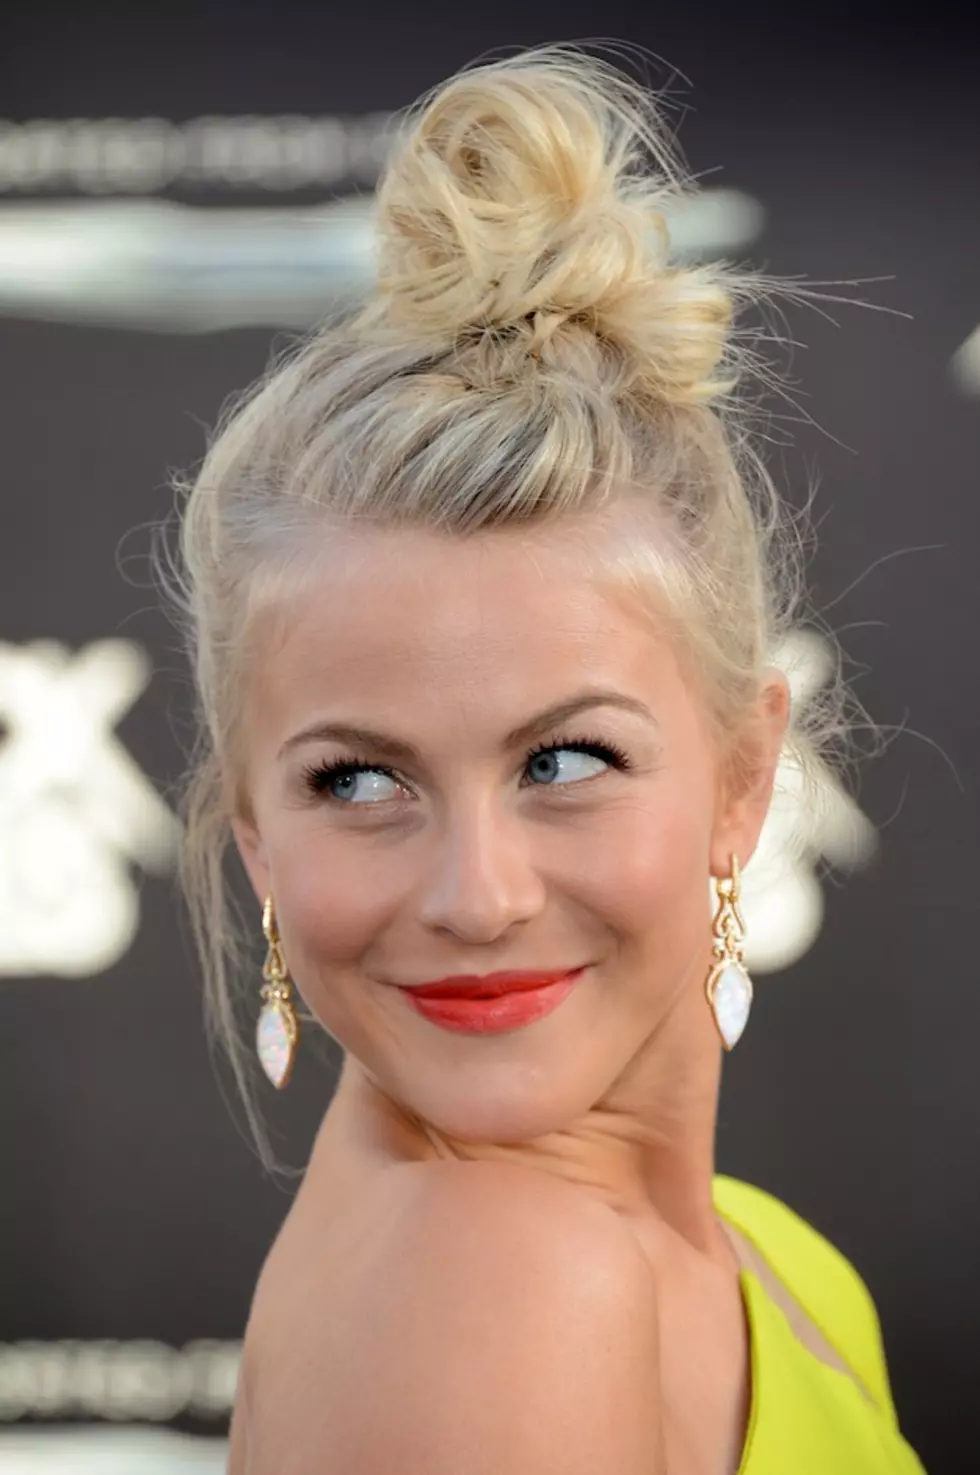 Julianne Hough &#8212; Crush of the Day